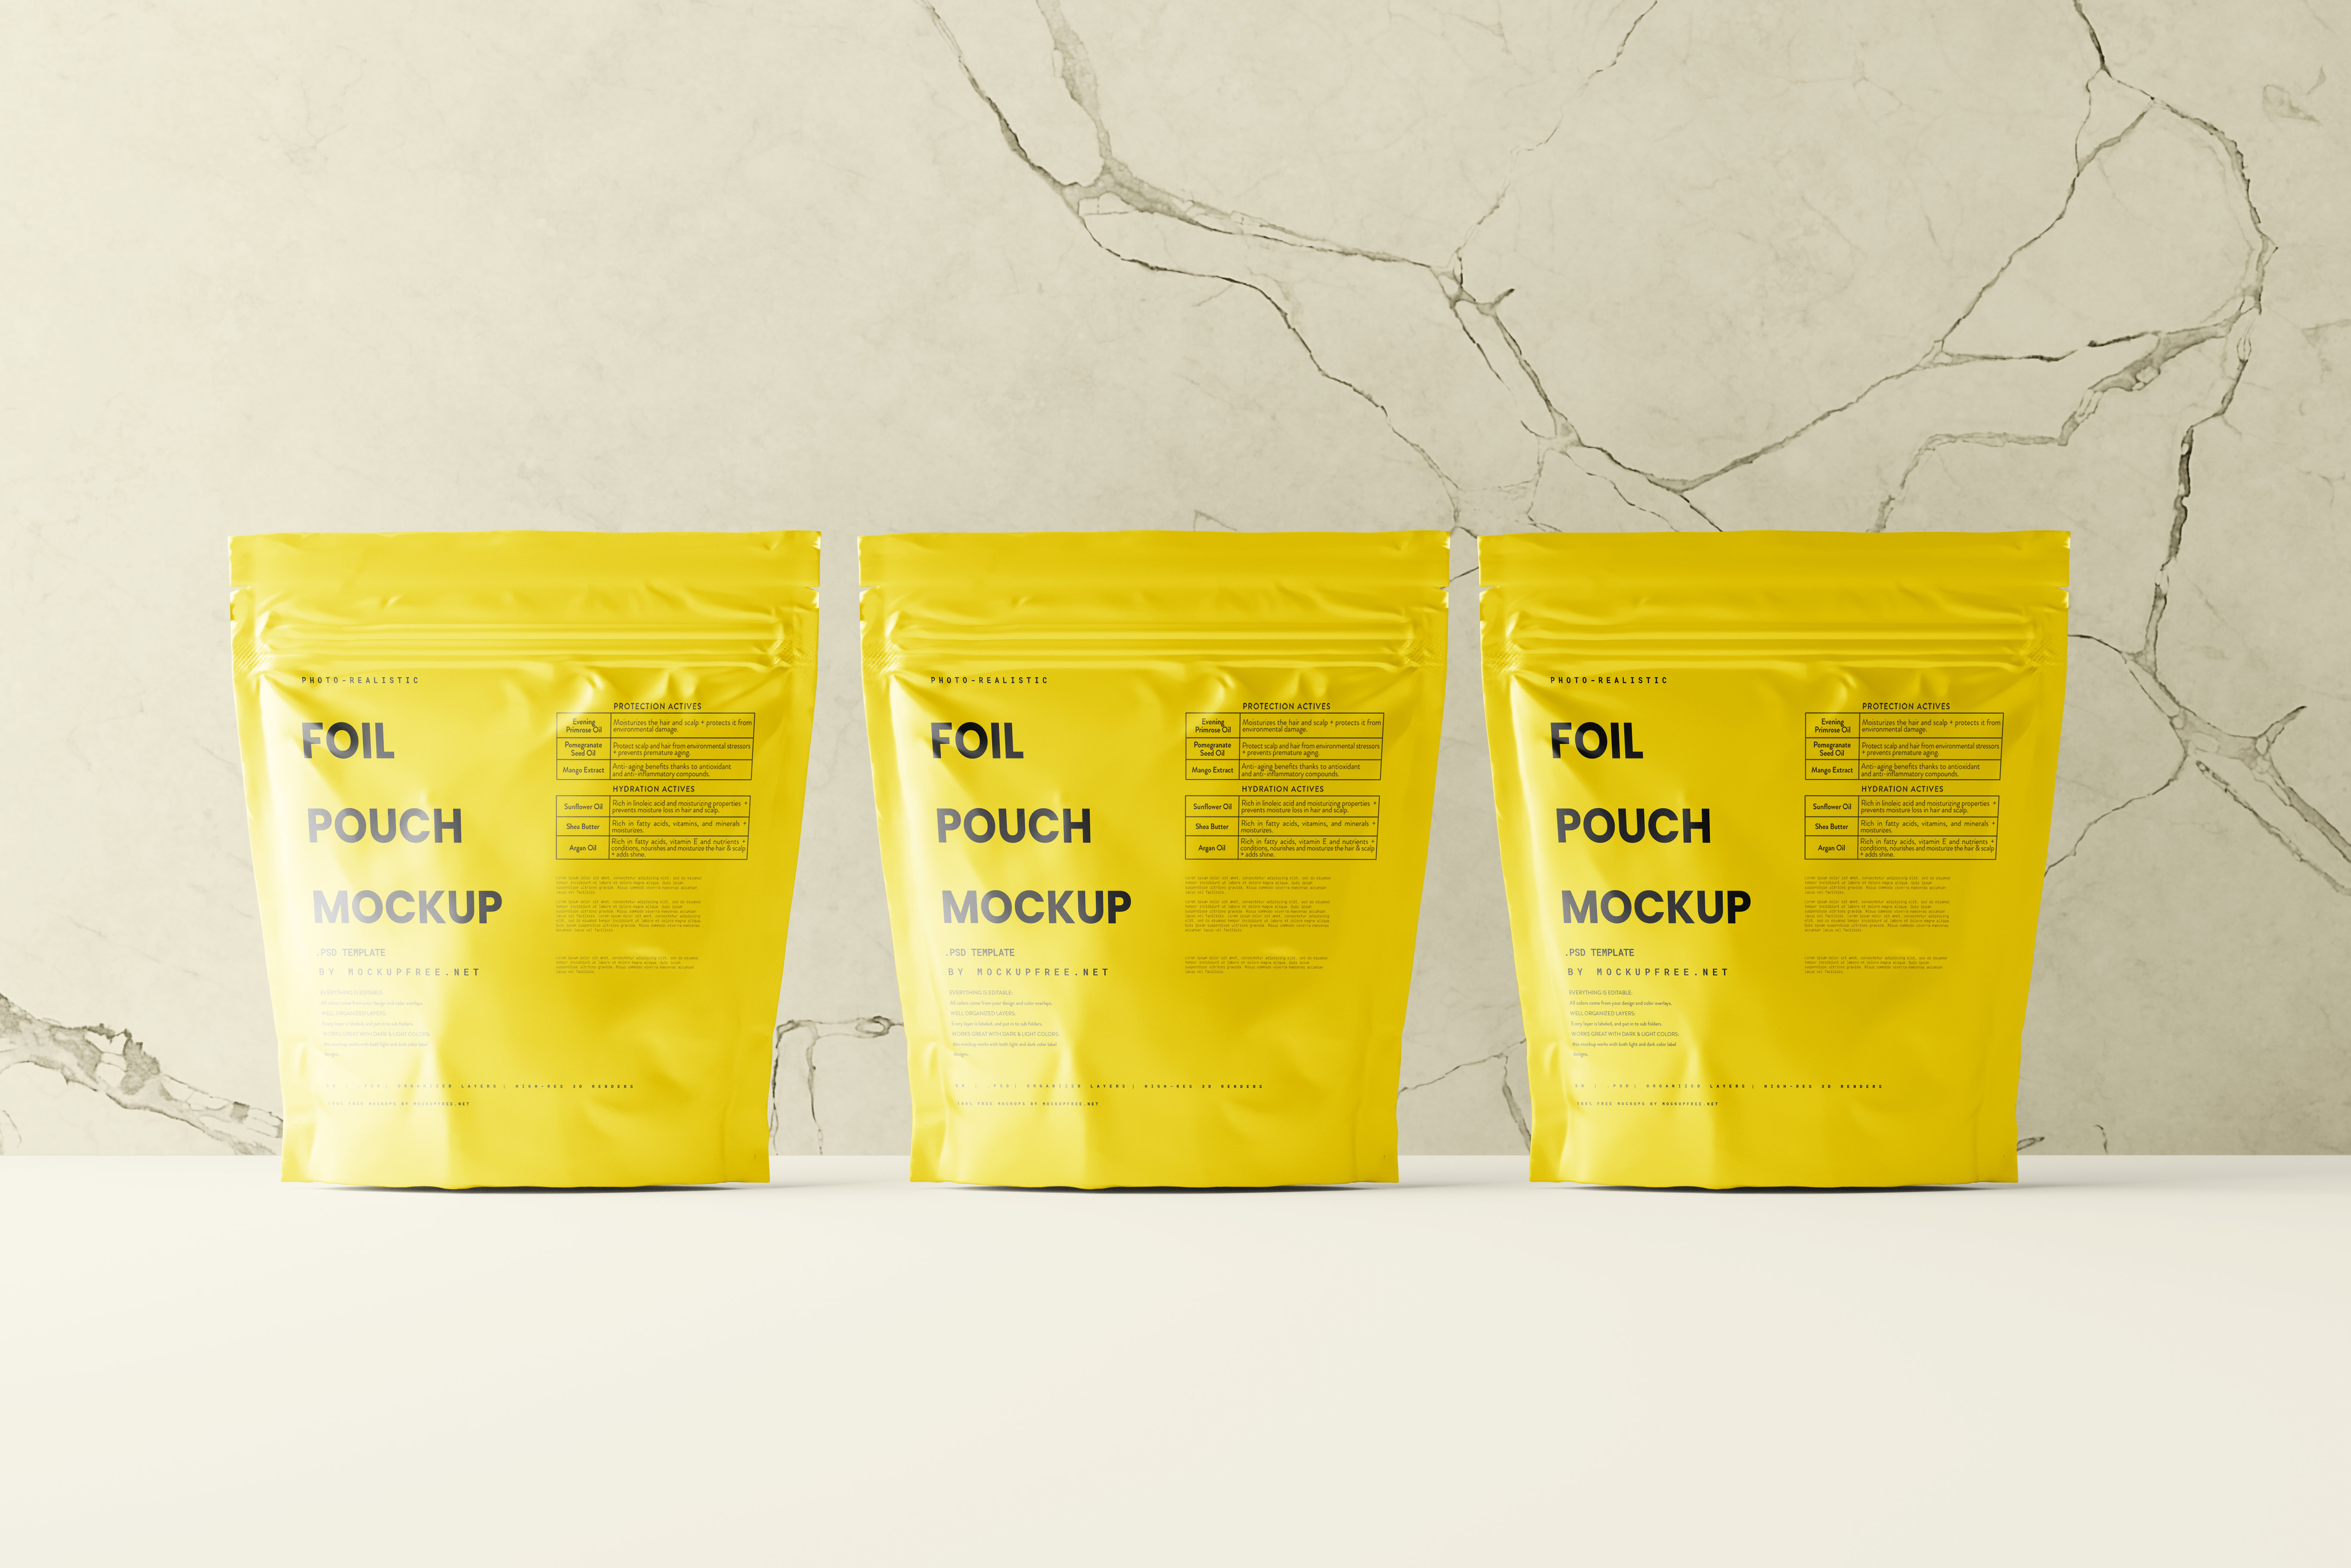 7 Square Foil Pouch Mockups in Varied Visions FREE PSD